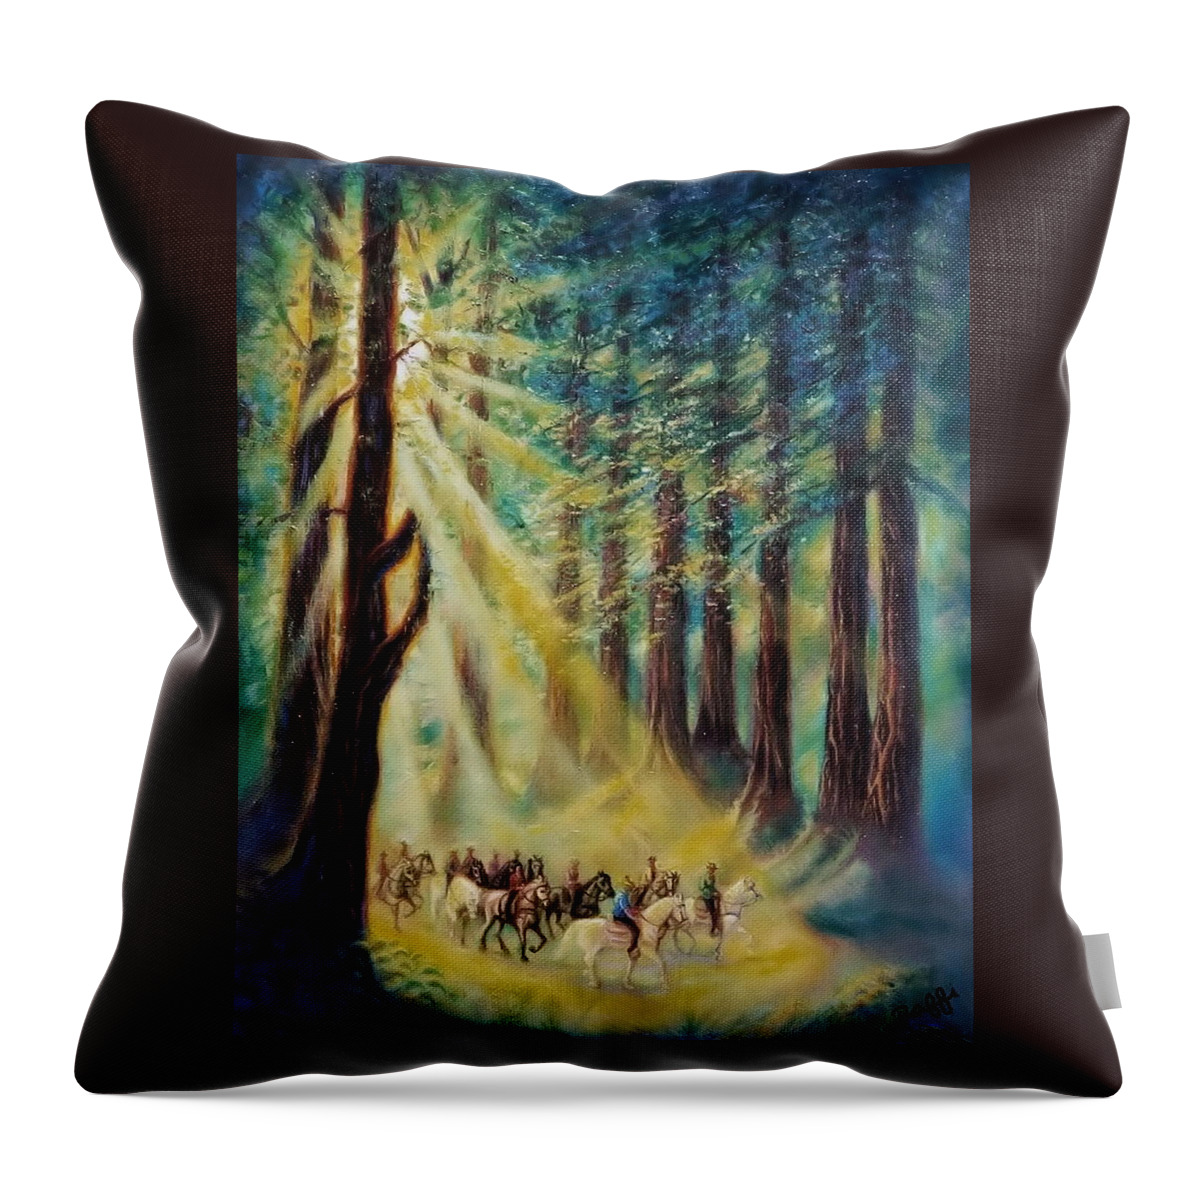 Gypsies Throw Pillow featuring the painting Gypsy Caravan by Raffi Jacobian